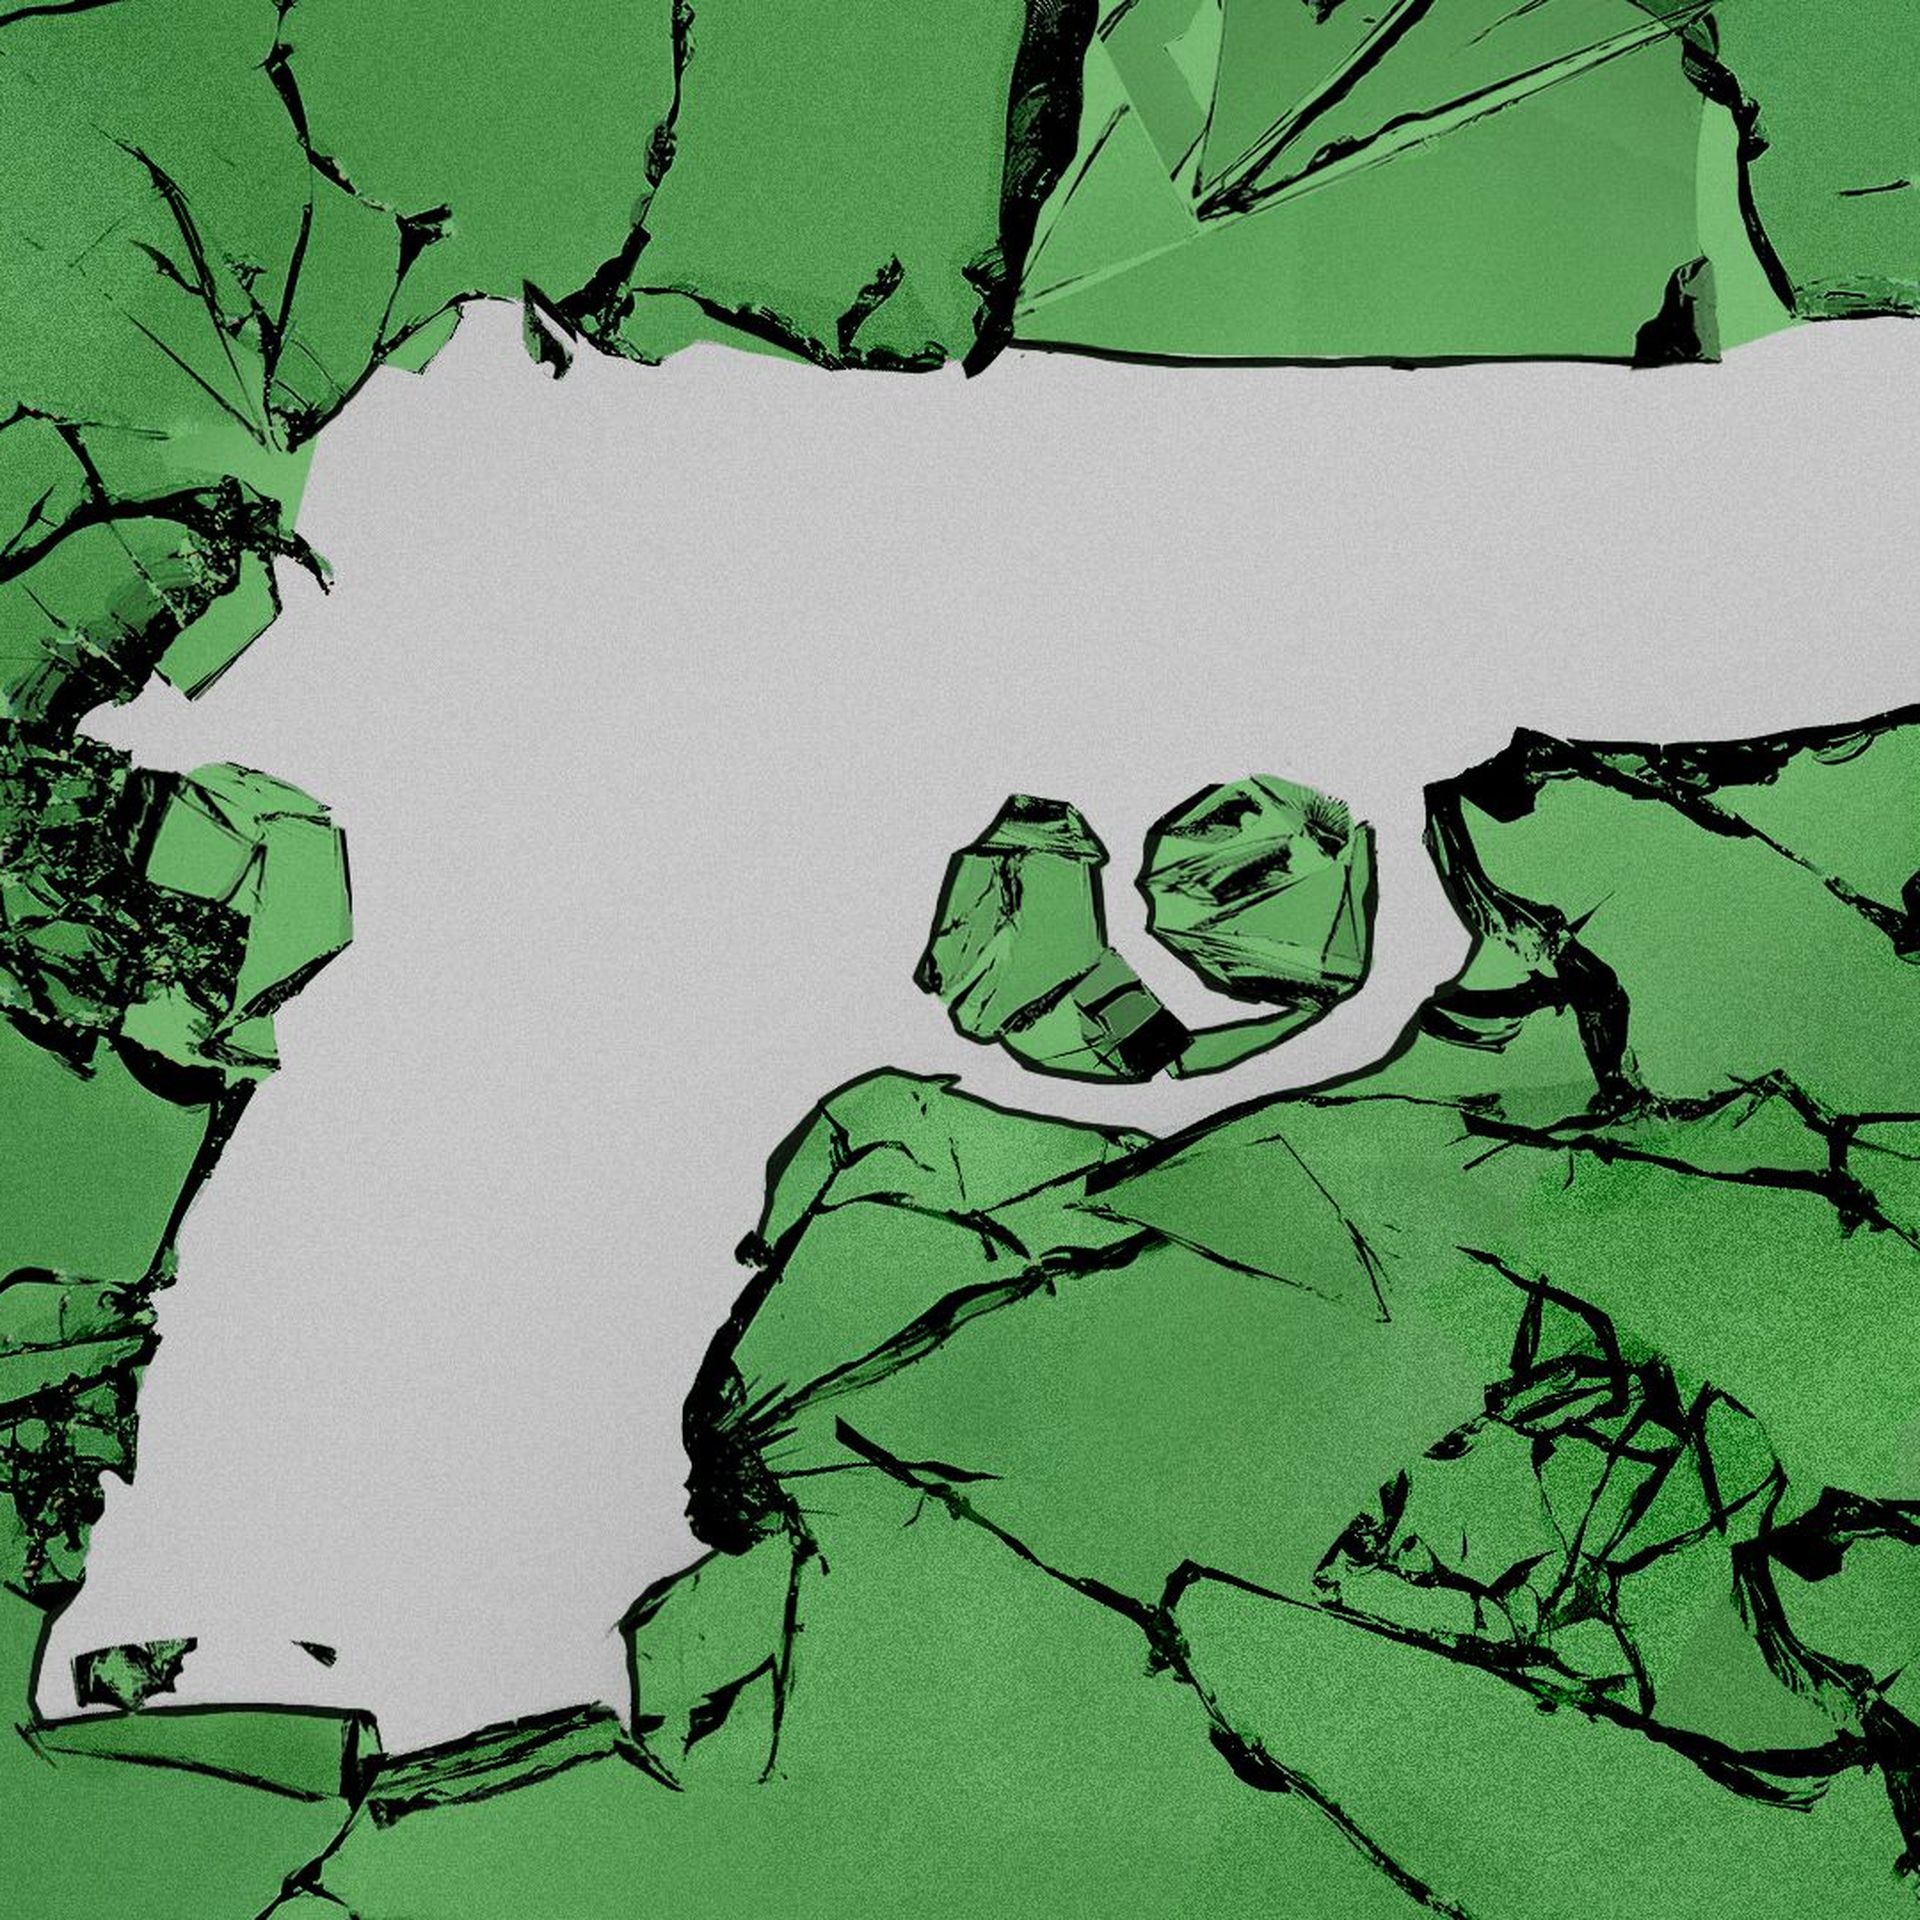 Illustration of shattered glass in the shape of a gun.